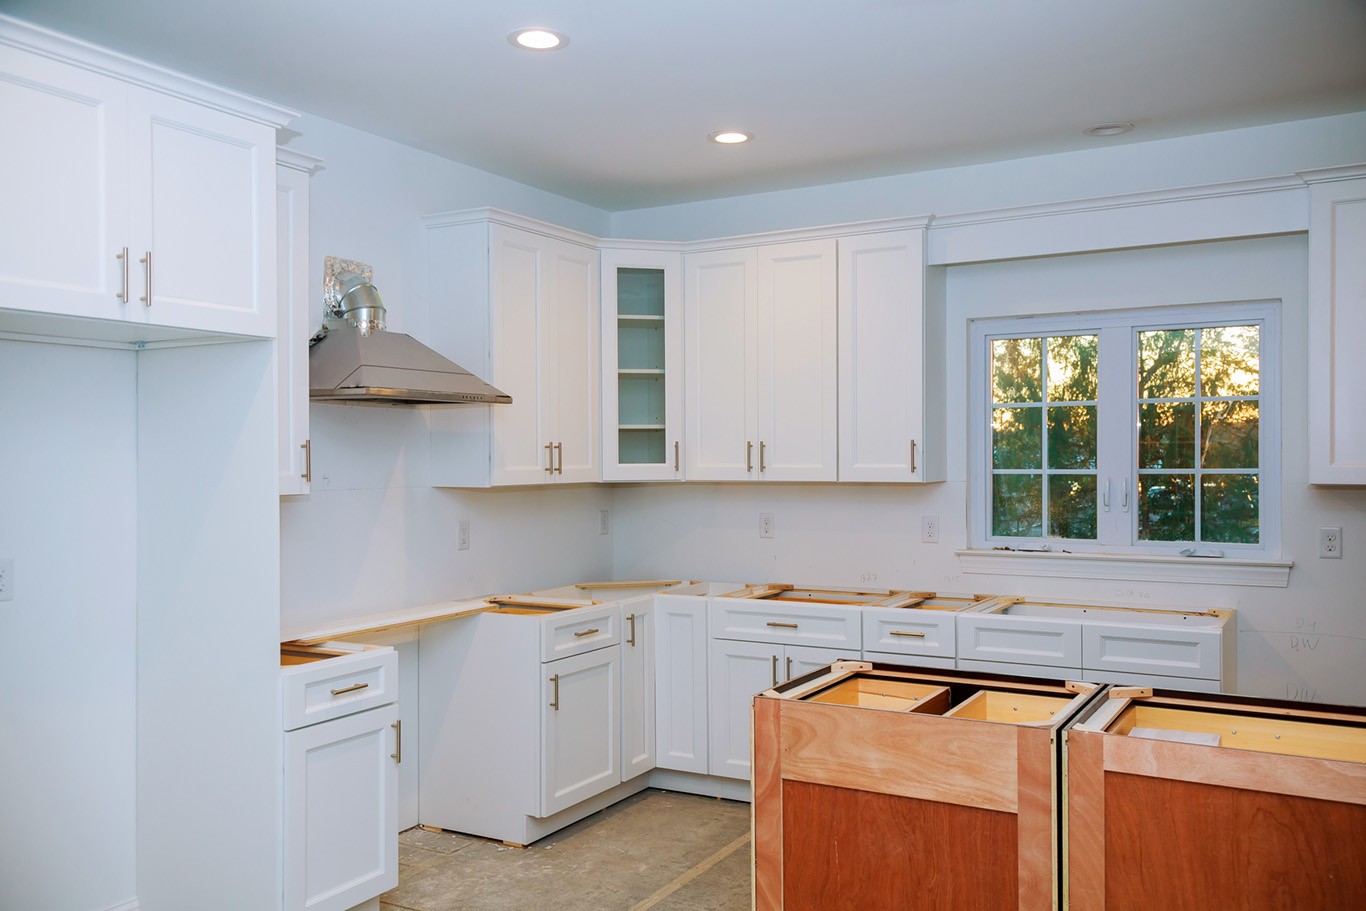 Upgrading to RTA Kitchen Cabinets? Here’s How to Do It Right the First Time!